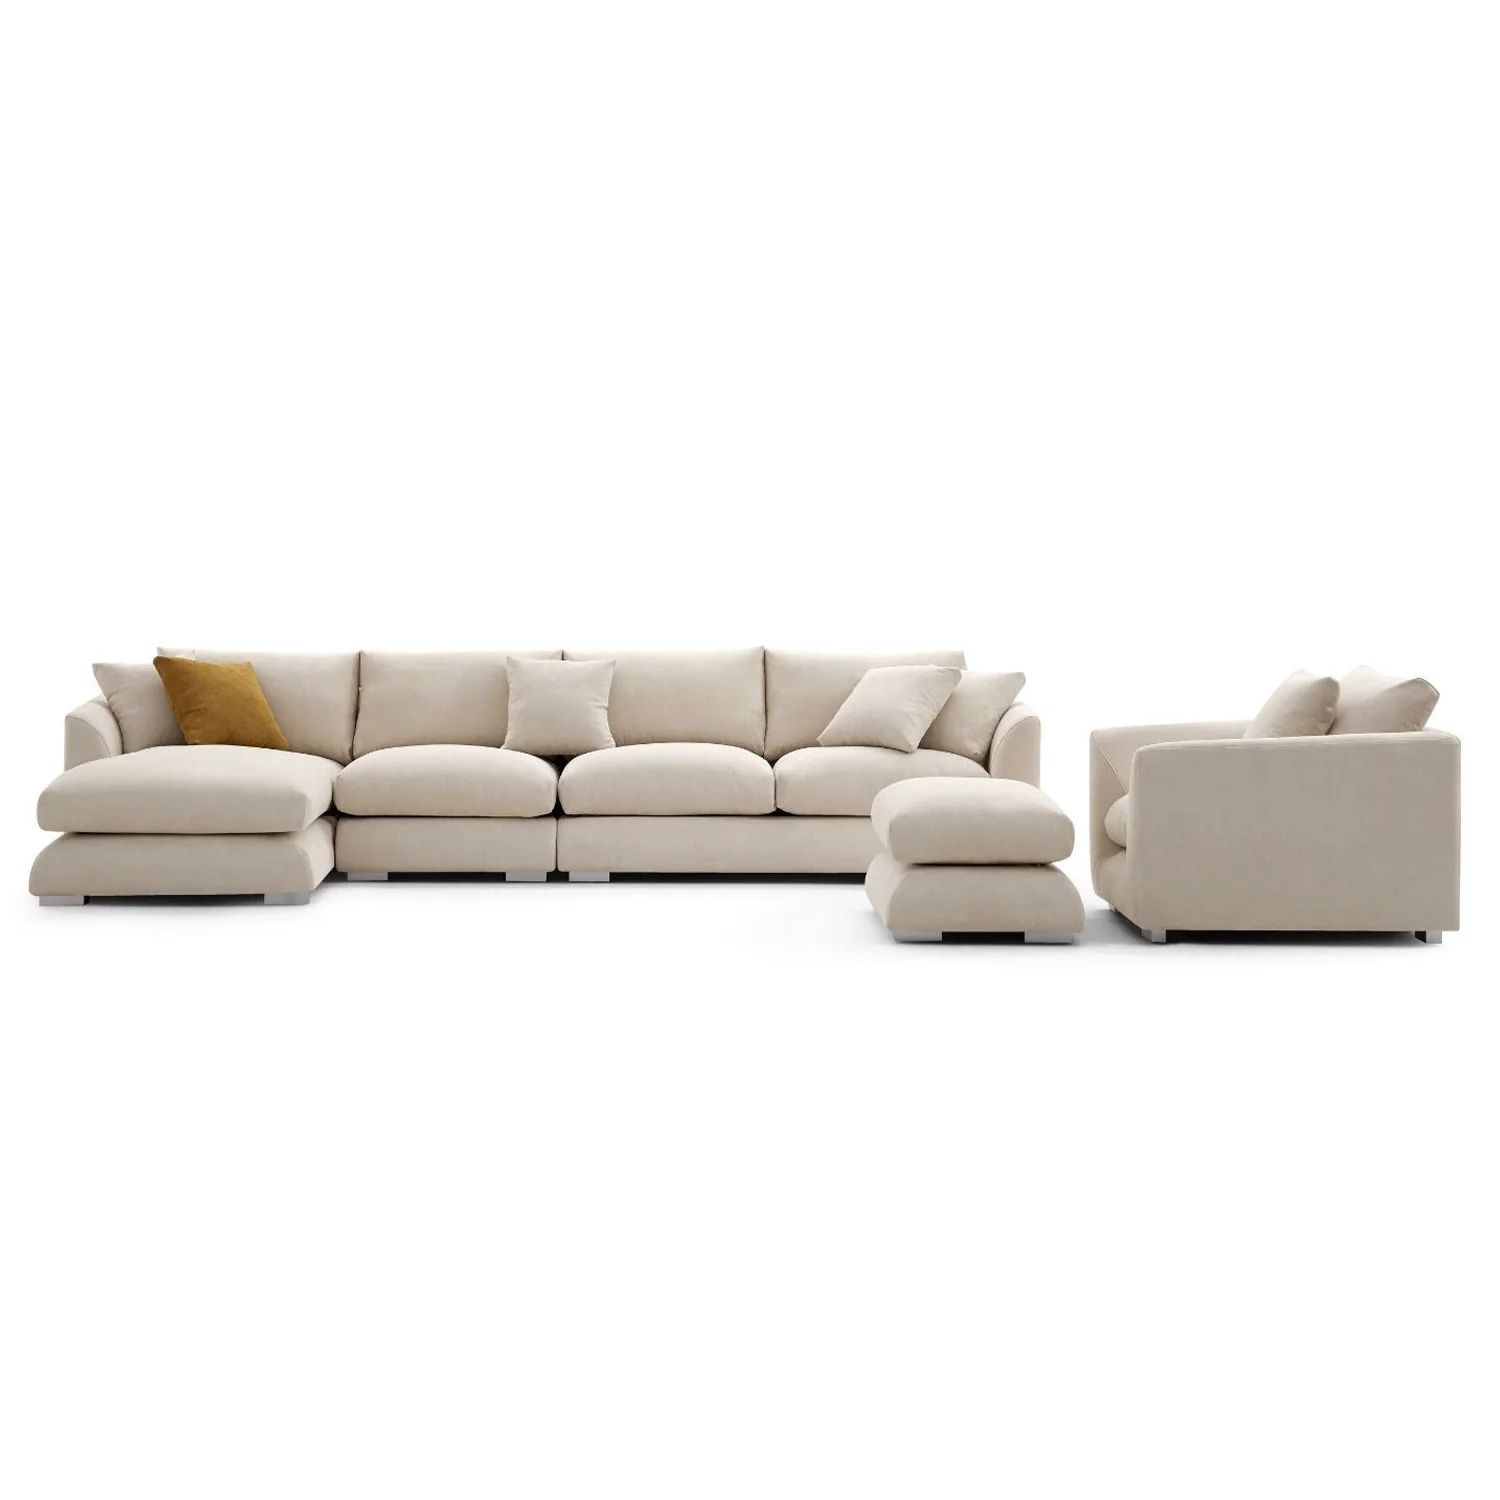 Feathers Room Set | Valyou Furniture